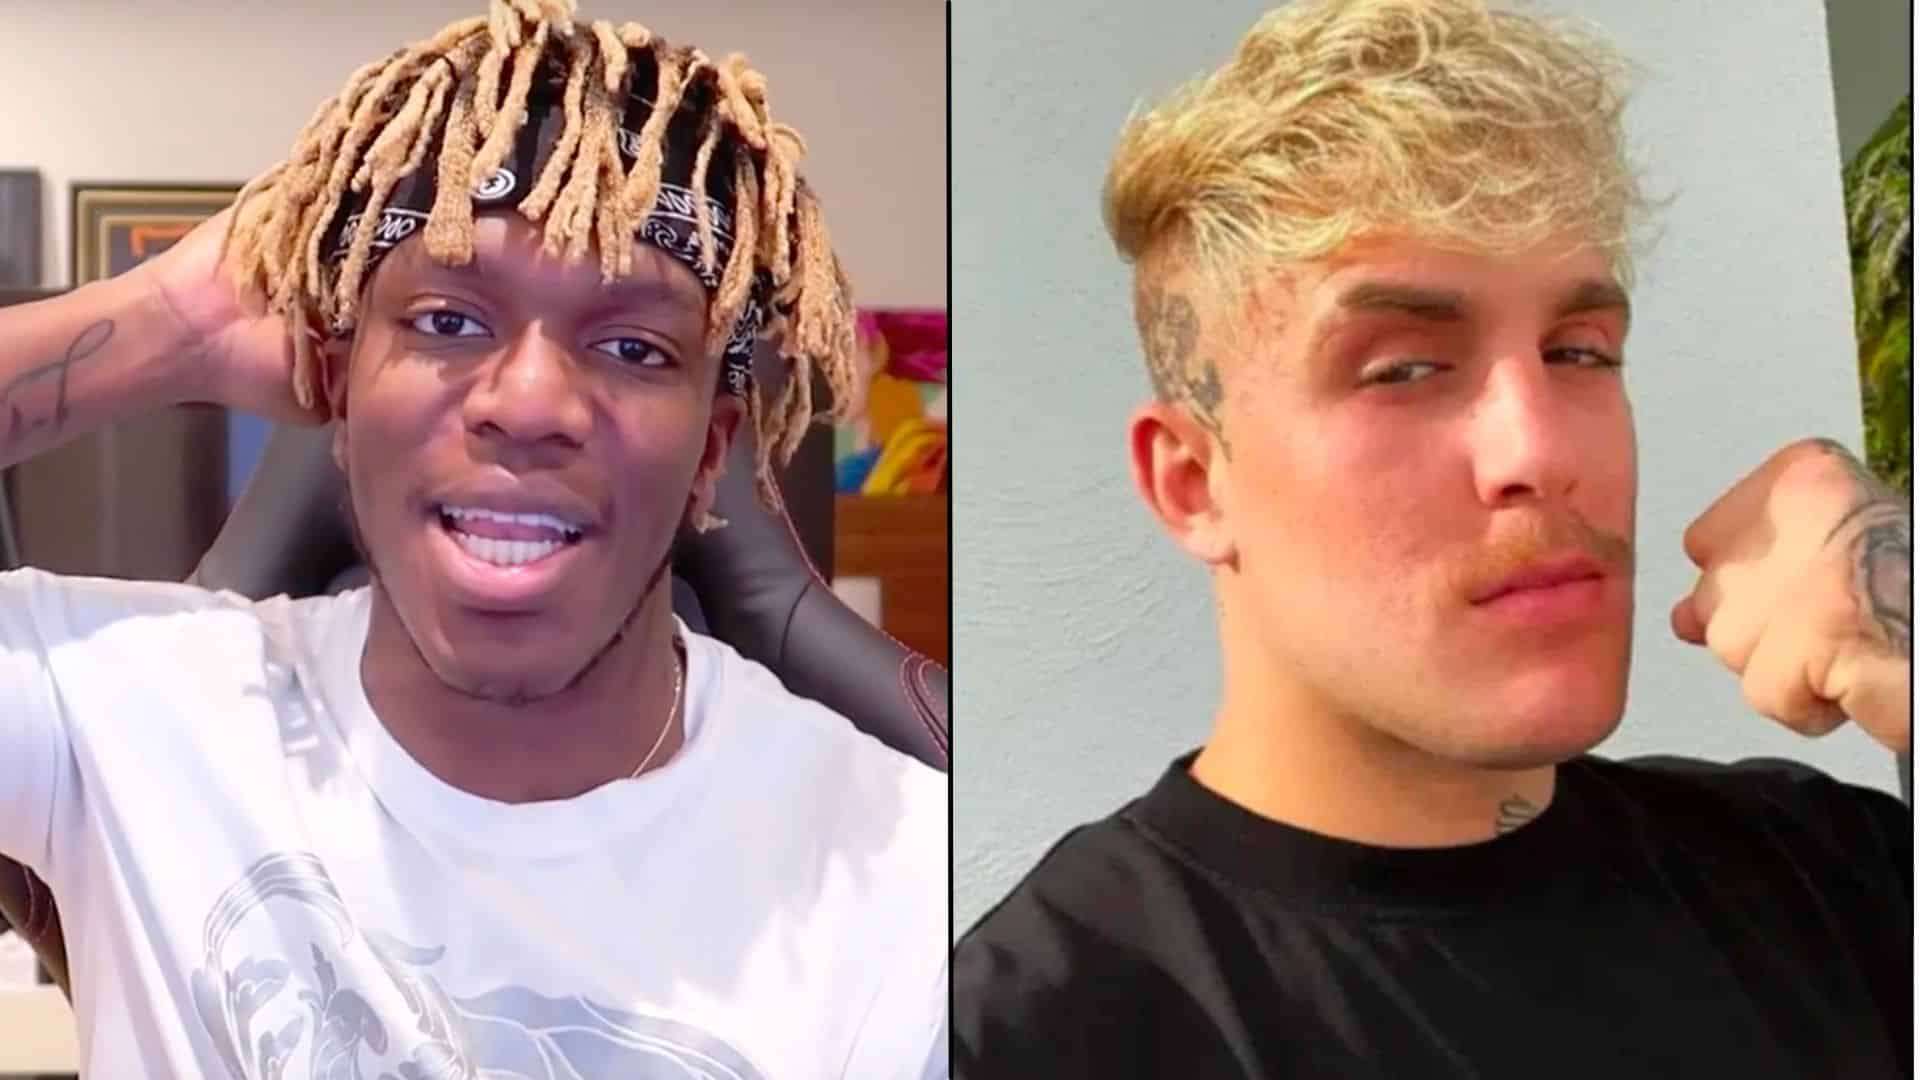 KSI and Jake Paul looking at camera side-by-side